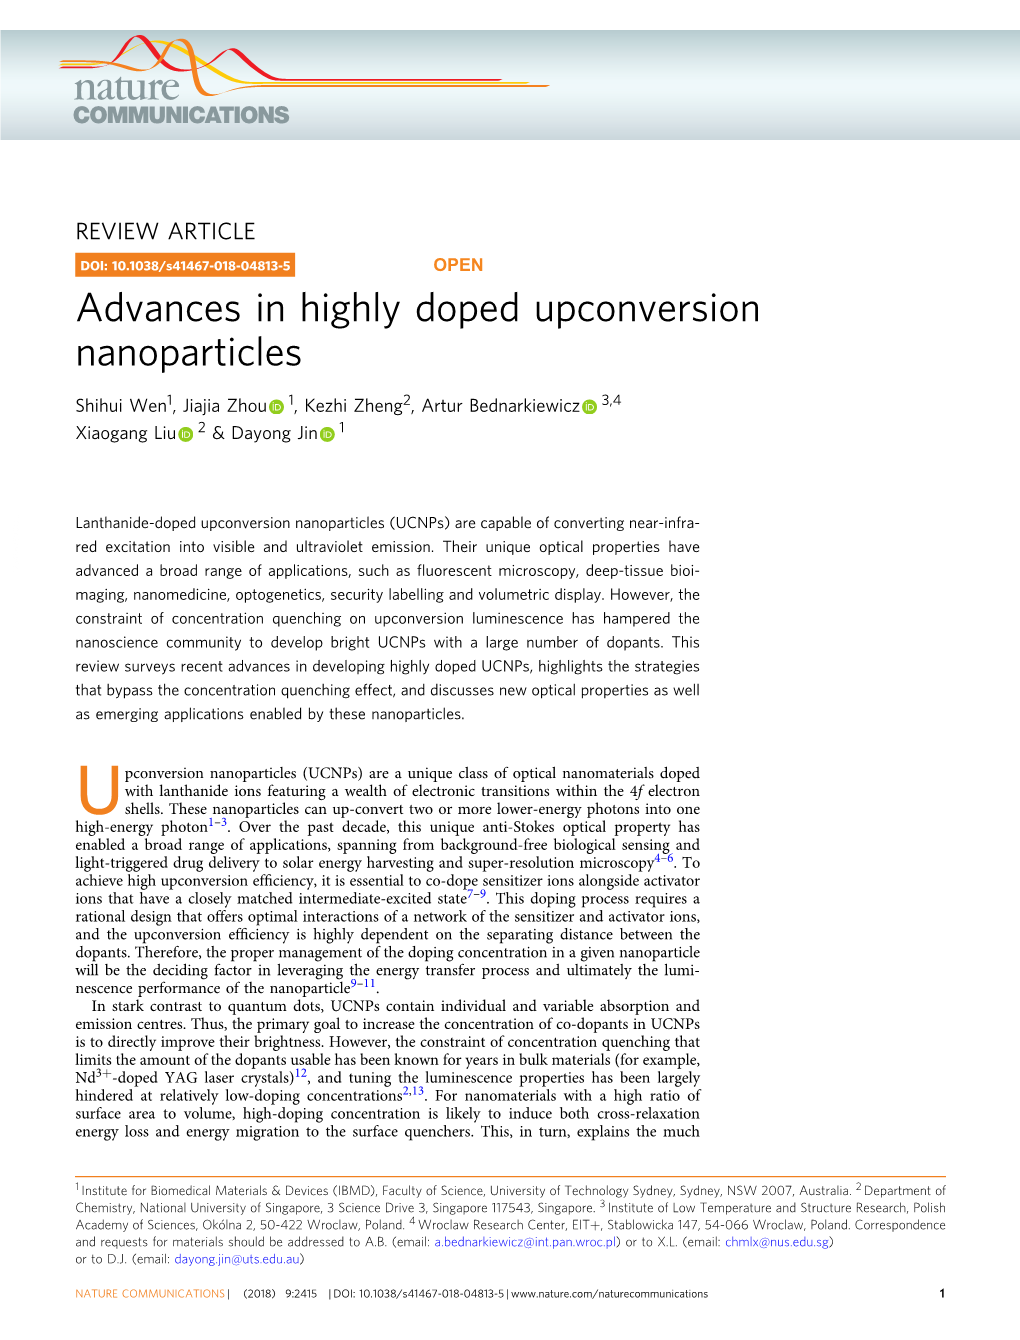 Advances in Highly Doped Upconversion Nanoparticles